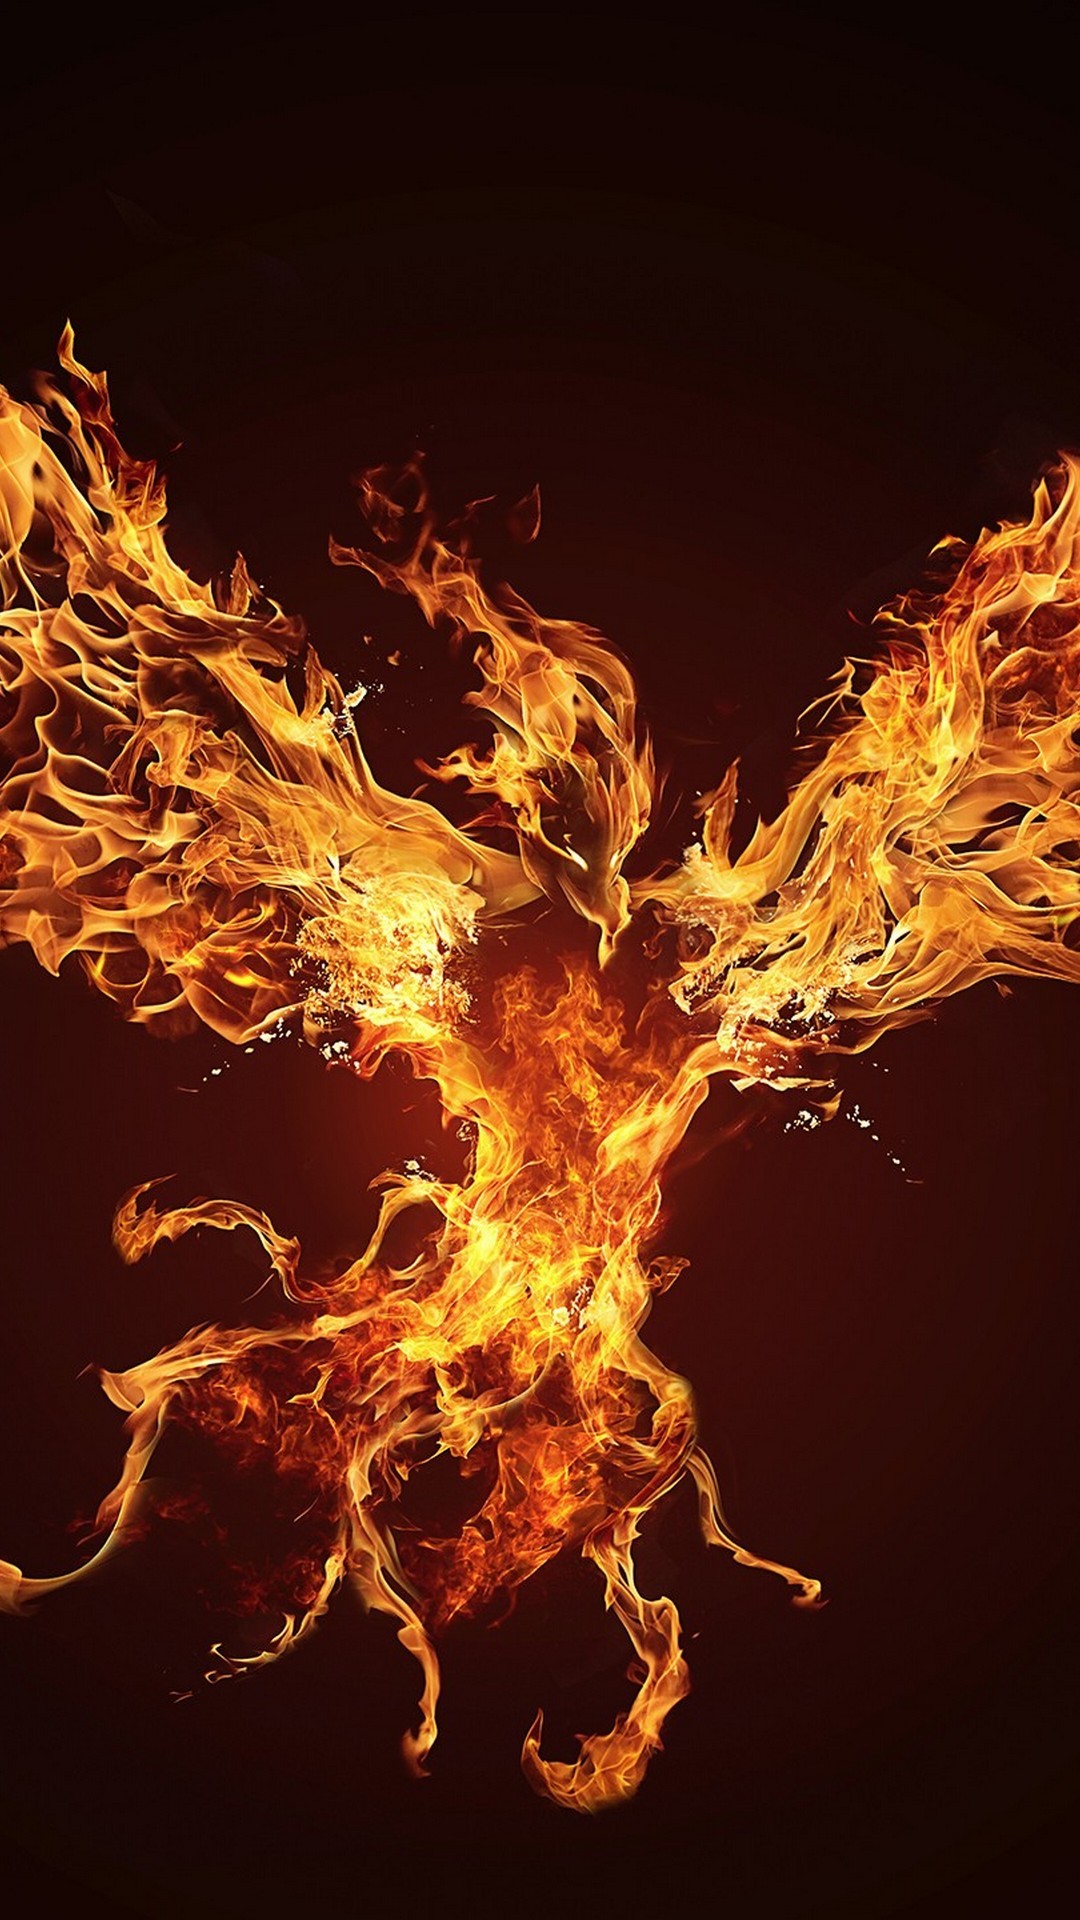 iPhone X Wallpaper Phoenix with image resolution 1080x1920 pixel. You can make this wallpaper for your iPhone 5, 6, 7, 8, X backgrounds, Mobile Screensaver, or iPad Lock Screen